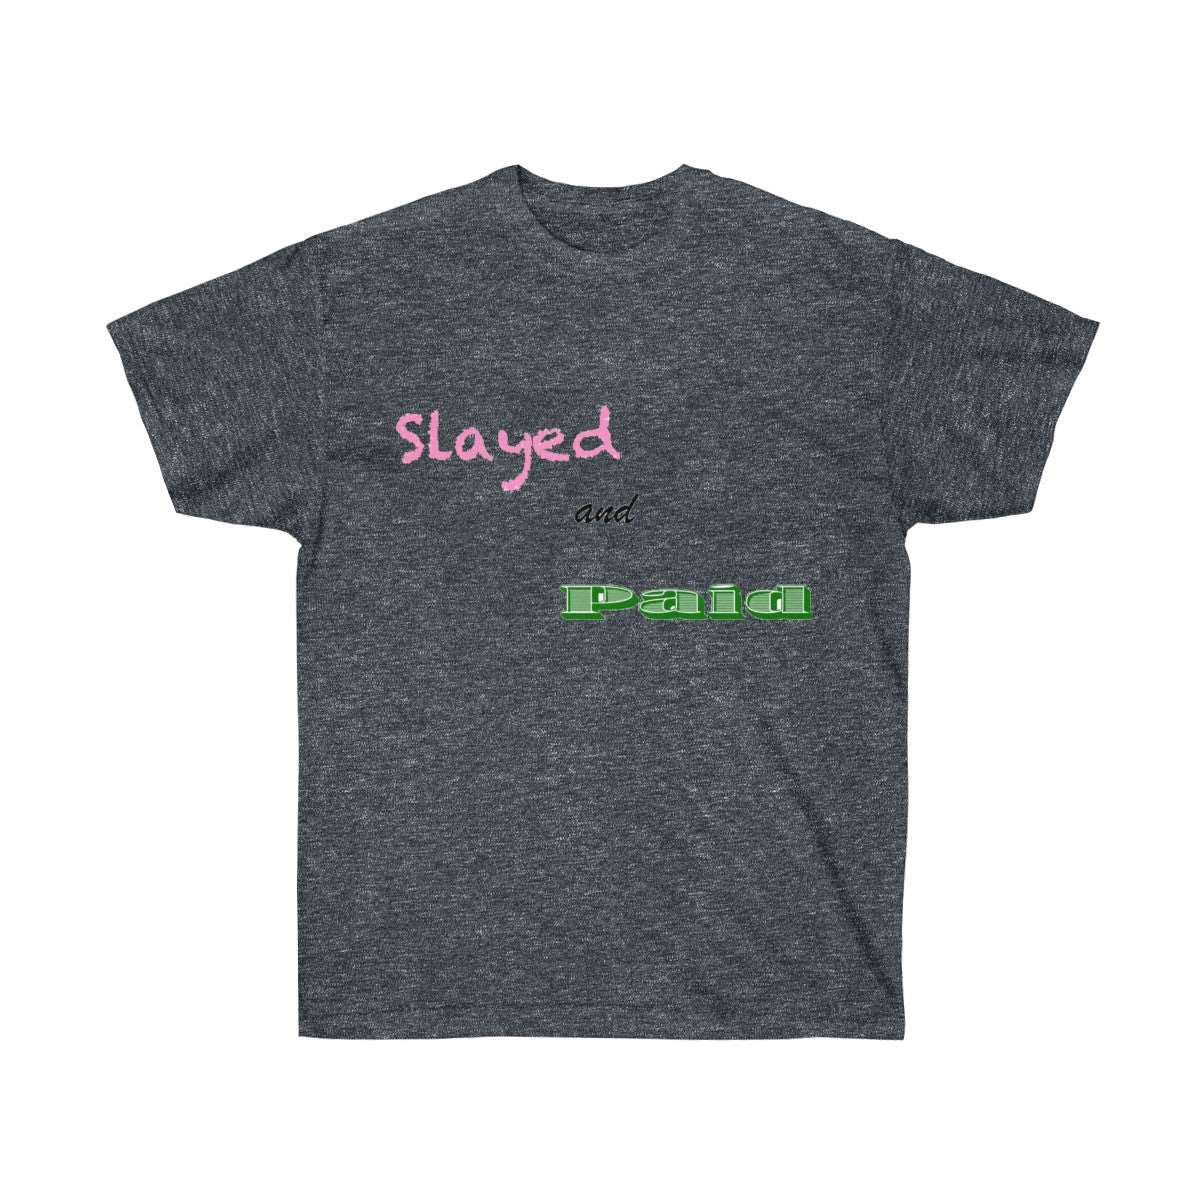 Slayed and Paid Ultra Cotton Tee - Slayed by Meme